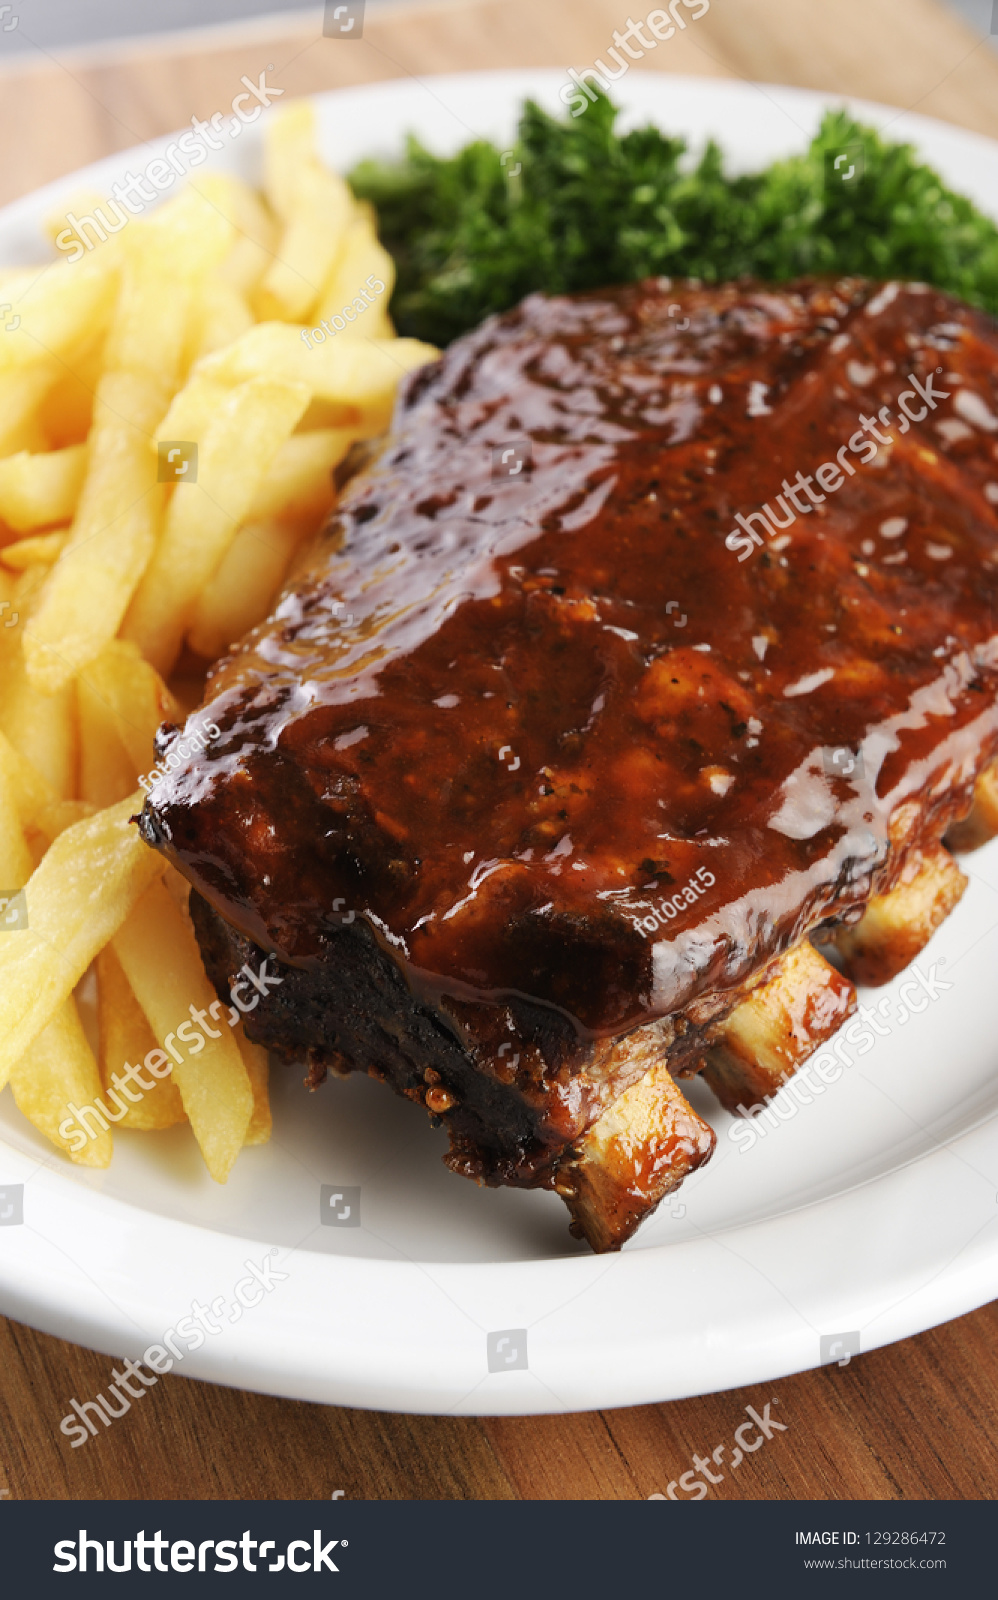 Grilled Juicy Barbecue Pork Ribs In A White Plate With Fries And ...